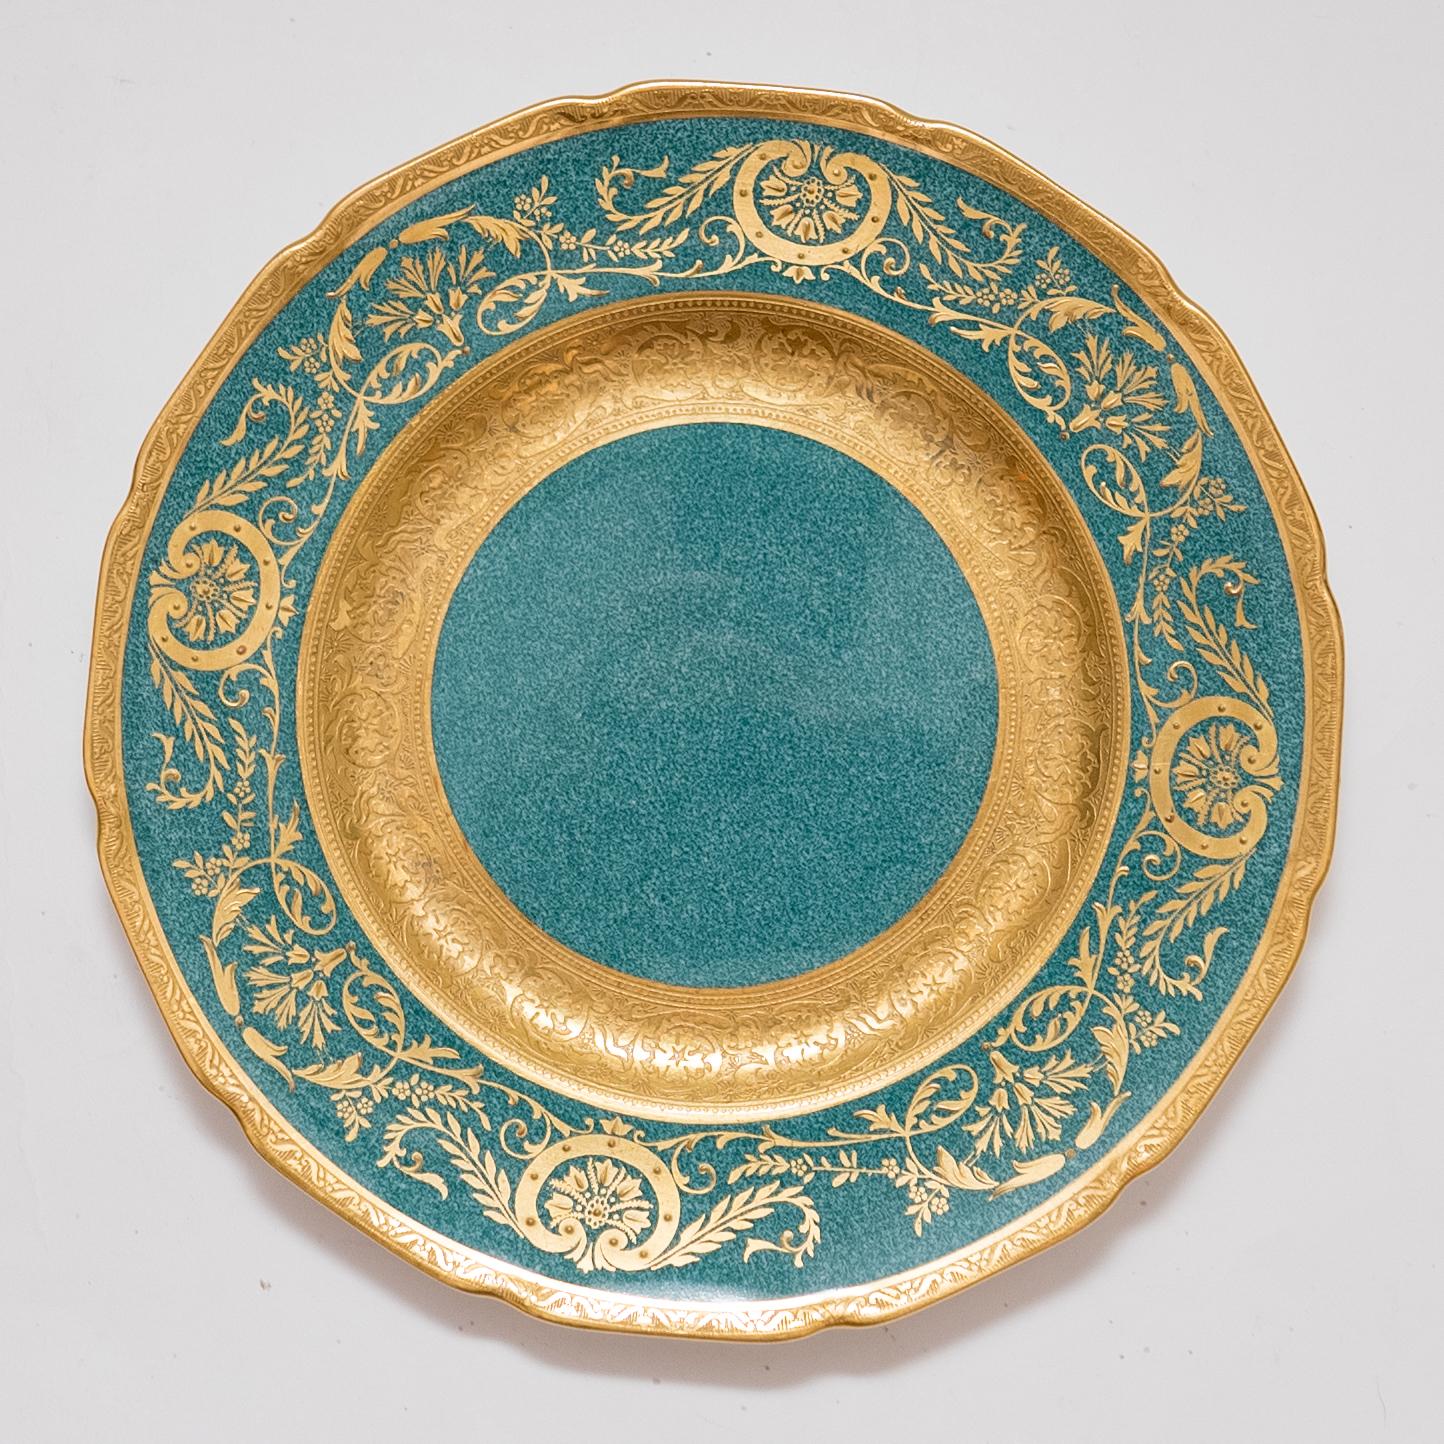 An unique set of first course, salad or dessert plates from Royal Doulton England and custom ordered through the fine Gilded Age Retailer Marshall Field, Chicago. This design features the classic Robert Allen shape and a vibrant green powder finish